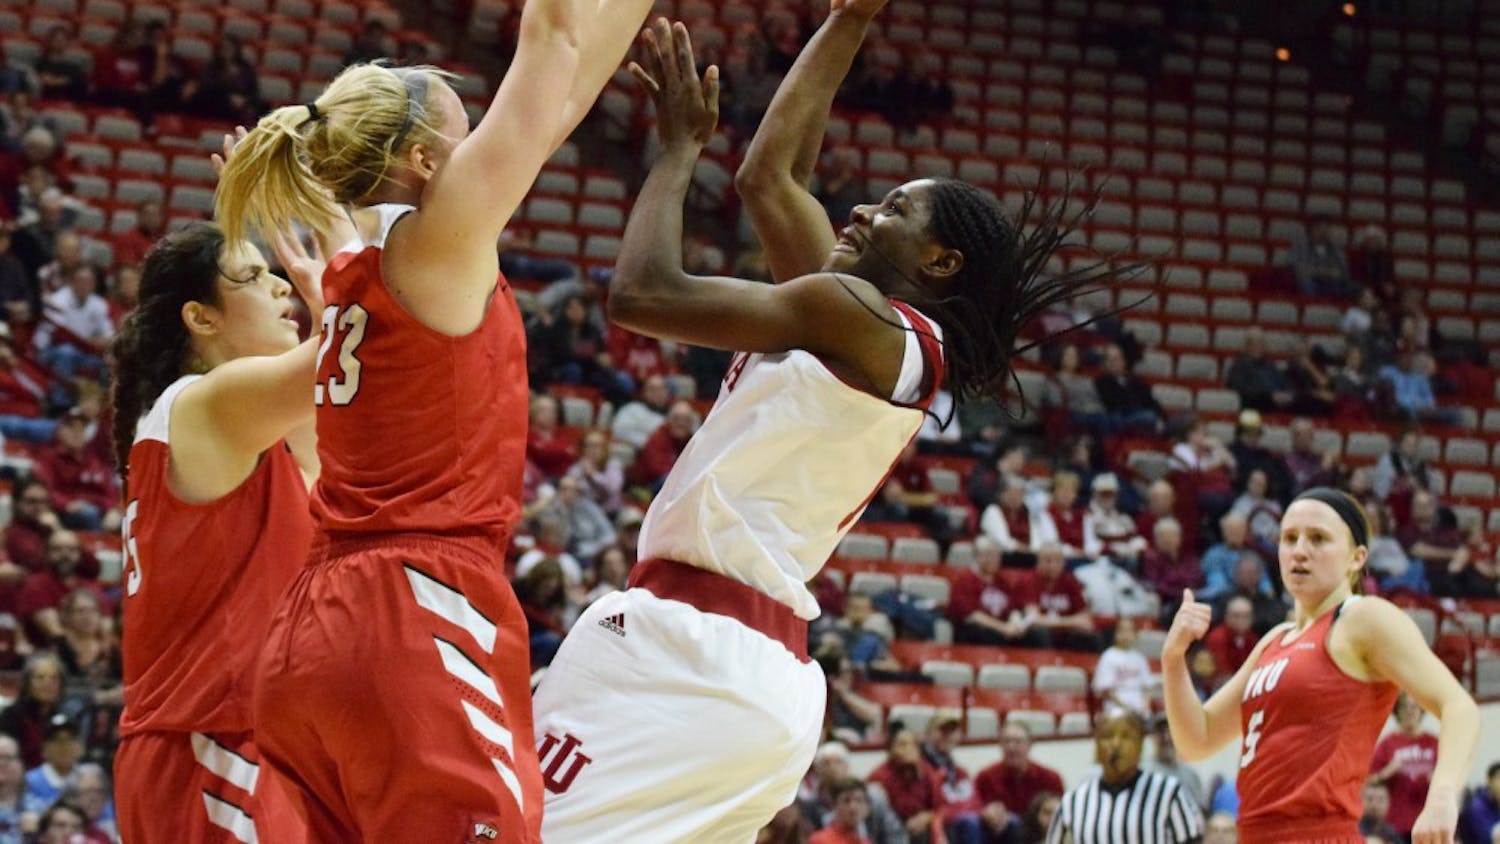 Freshman guard Bendu Yeaney scores against Western Kentucky during Friday's game at Simon Skjodt Assembly Hall. IU won, 73-71.